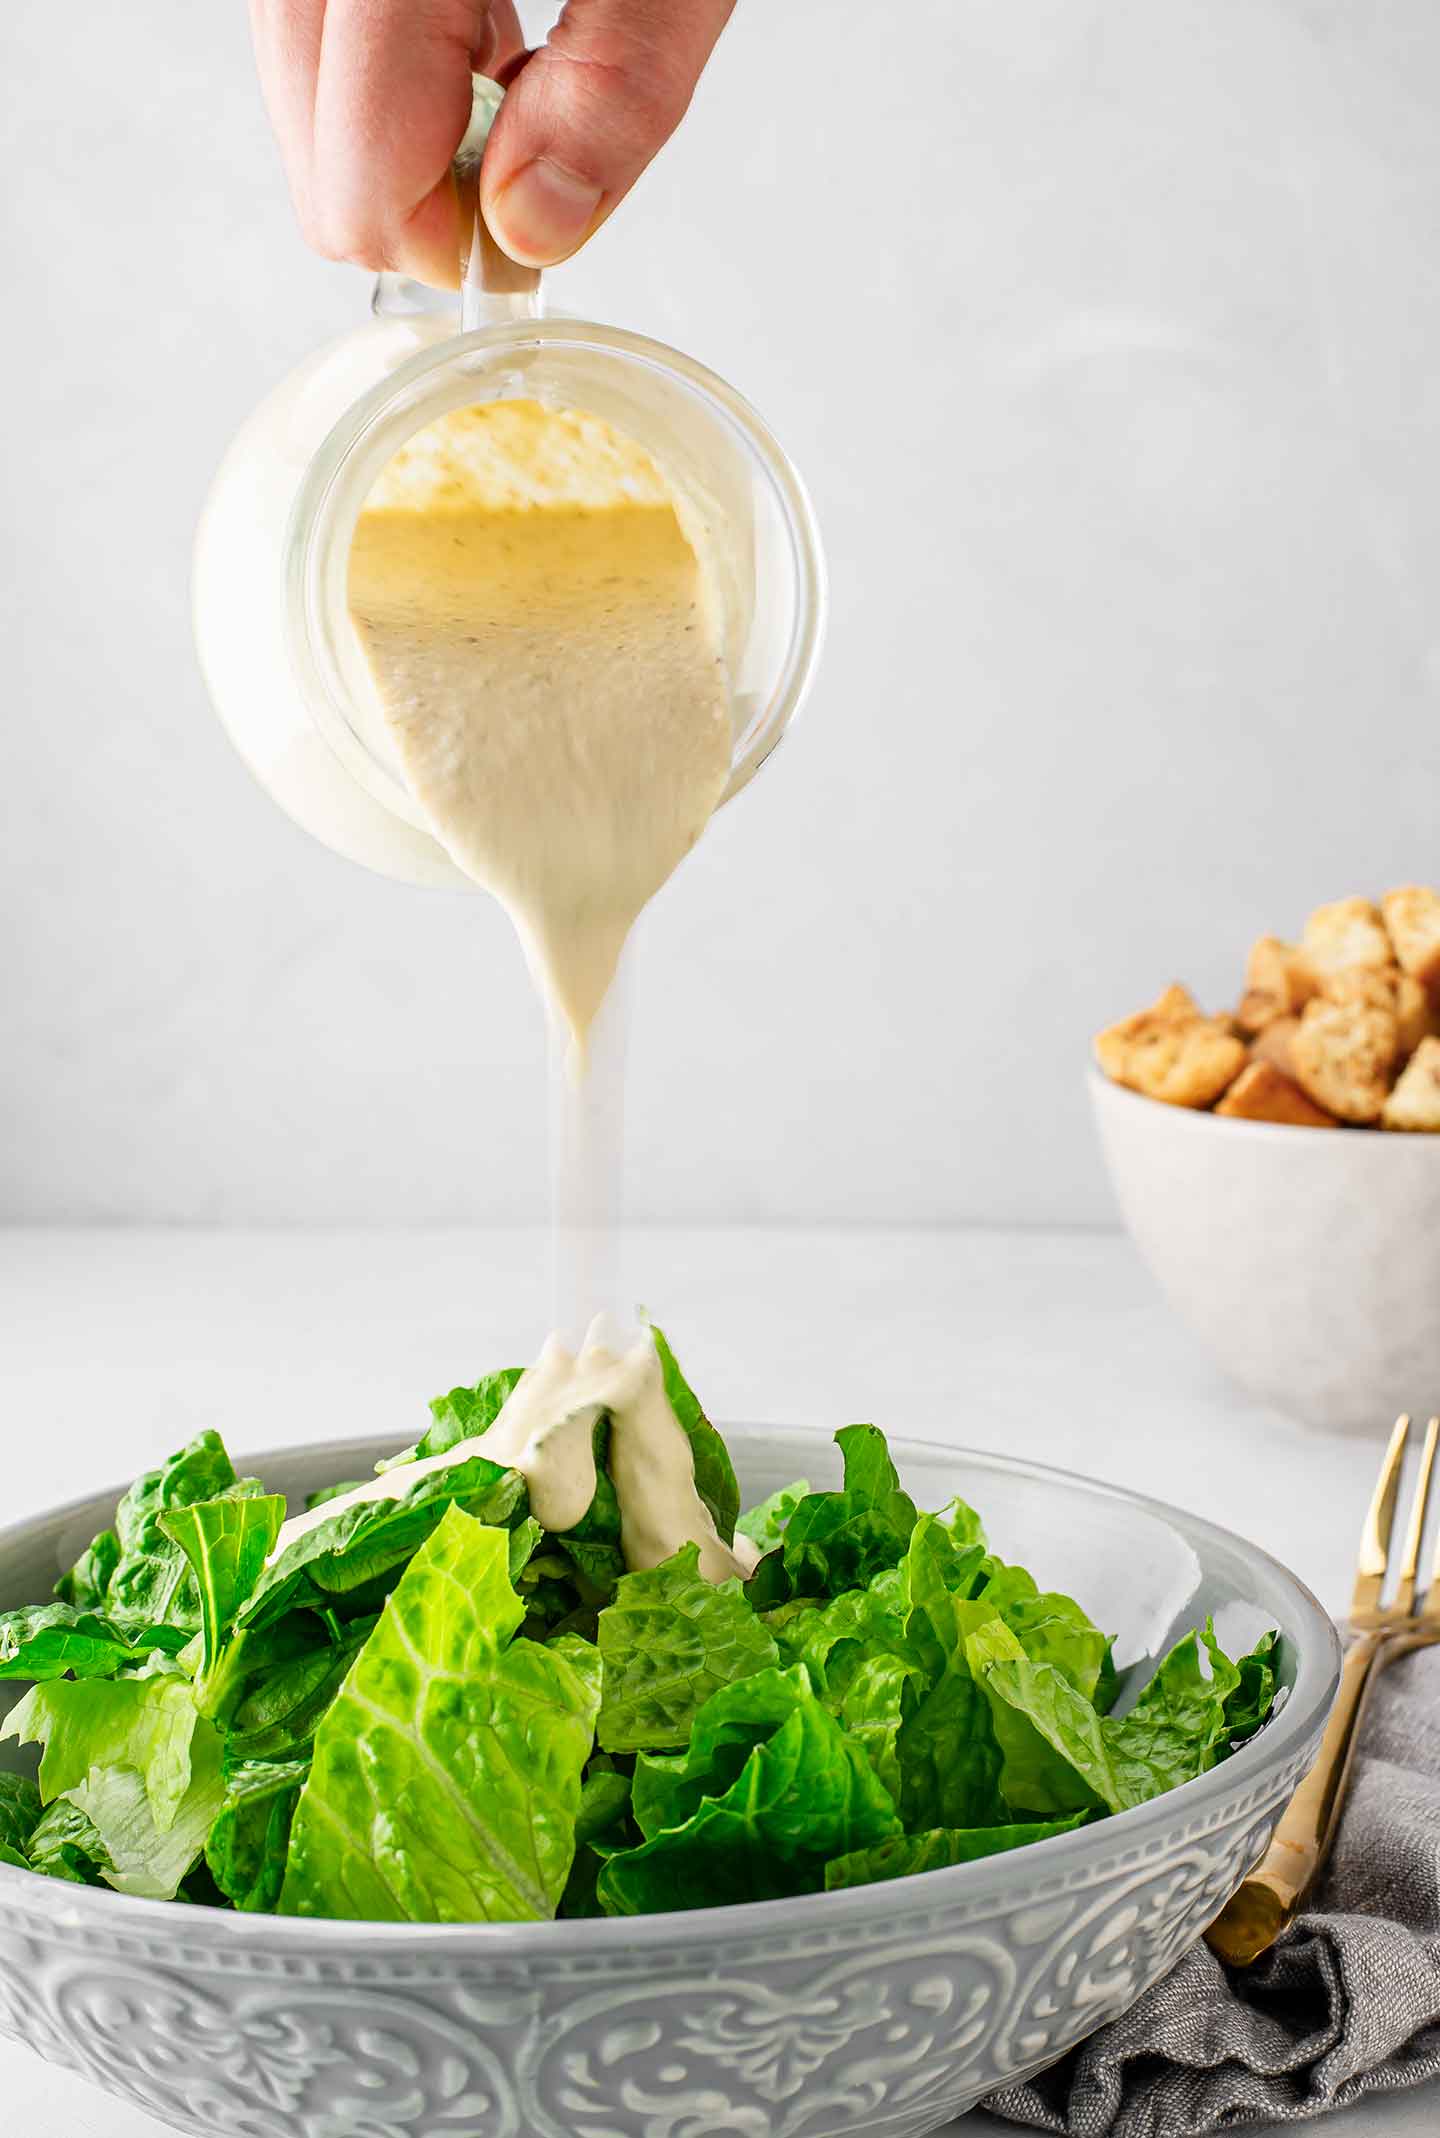 Zingy caesar dressing being poured from a glass jar over a bowl of romaine lettuce with croutons in a bowl in the background